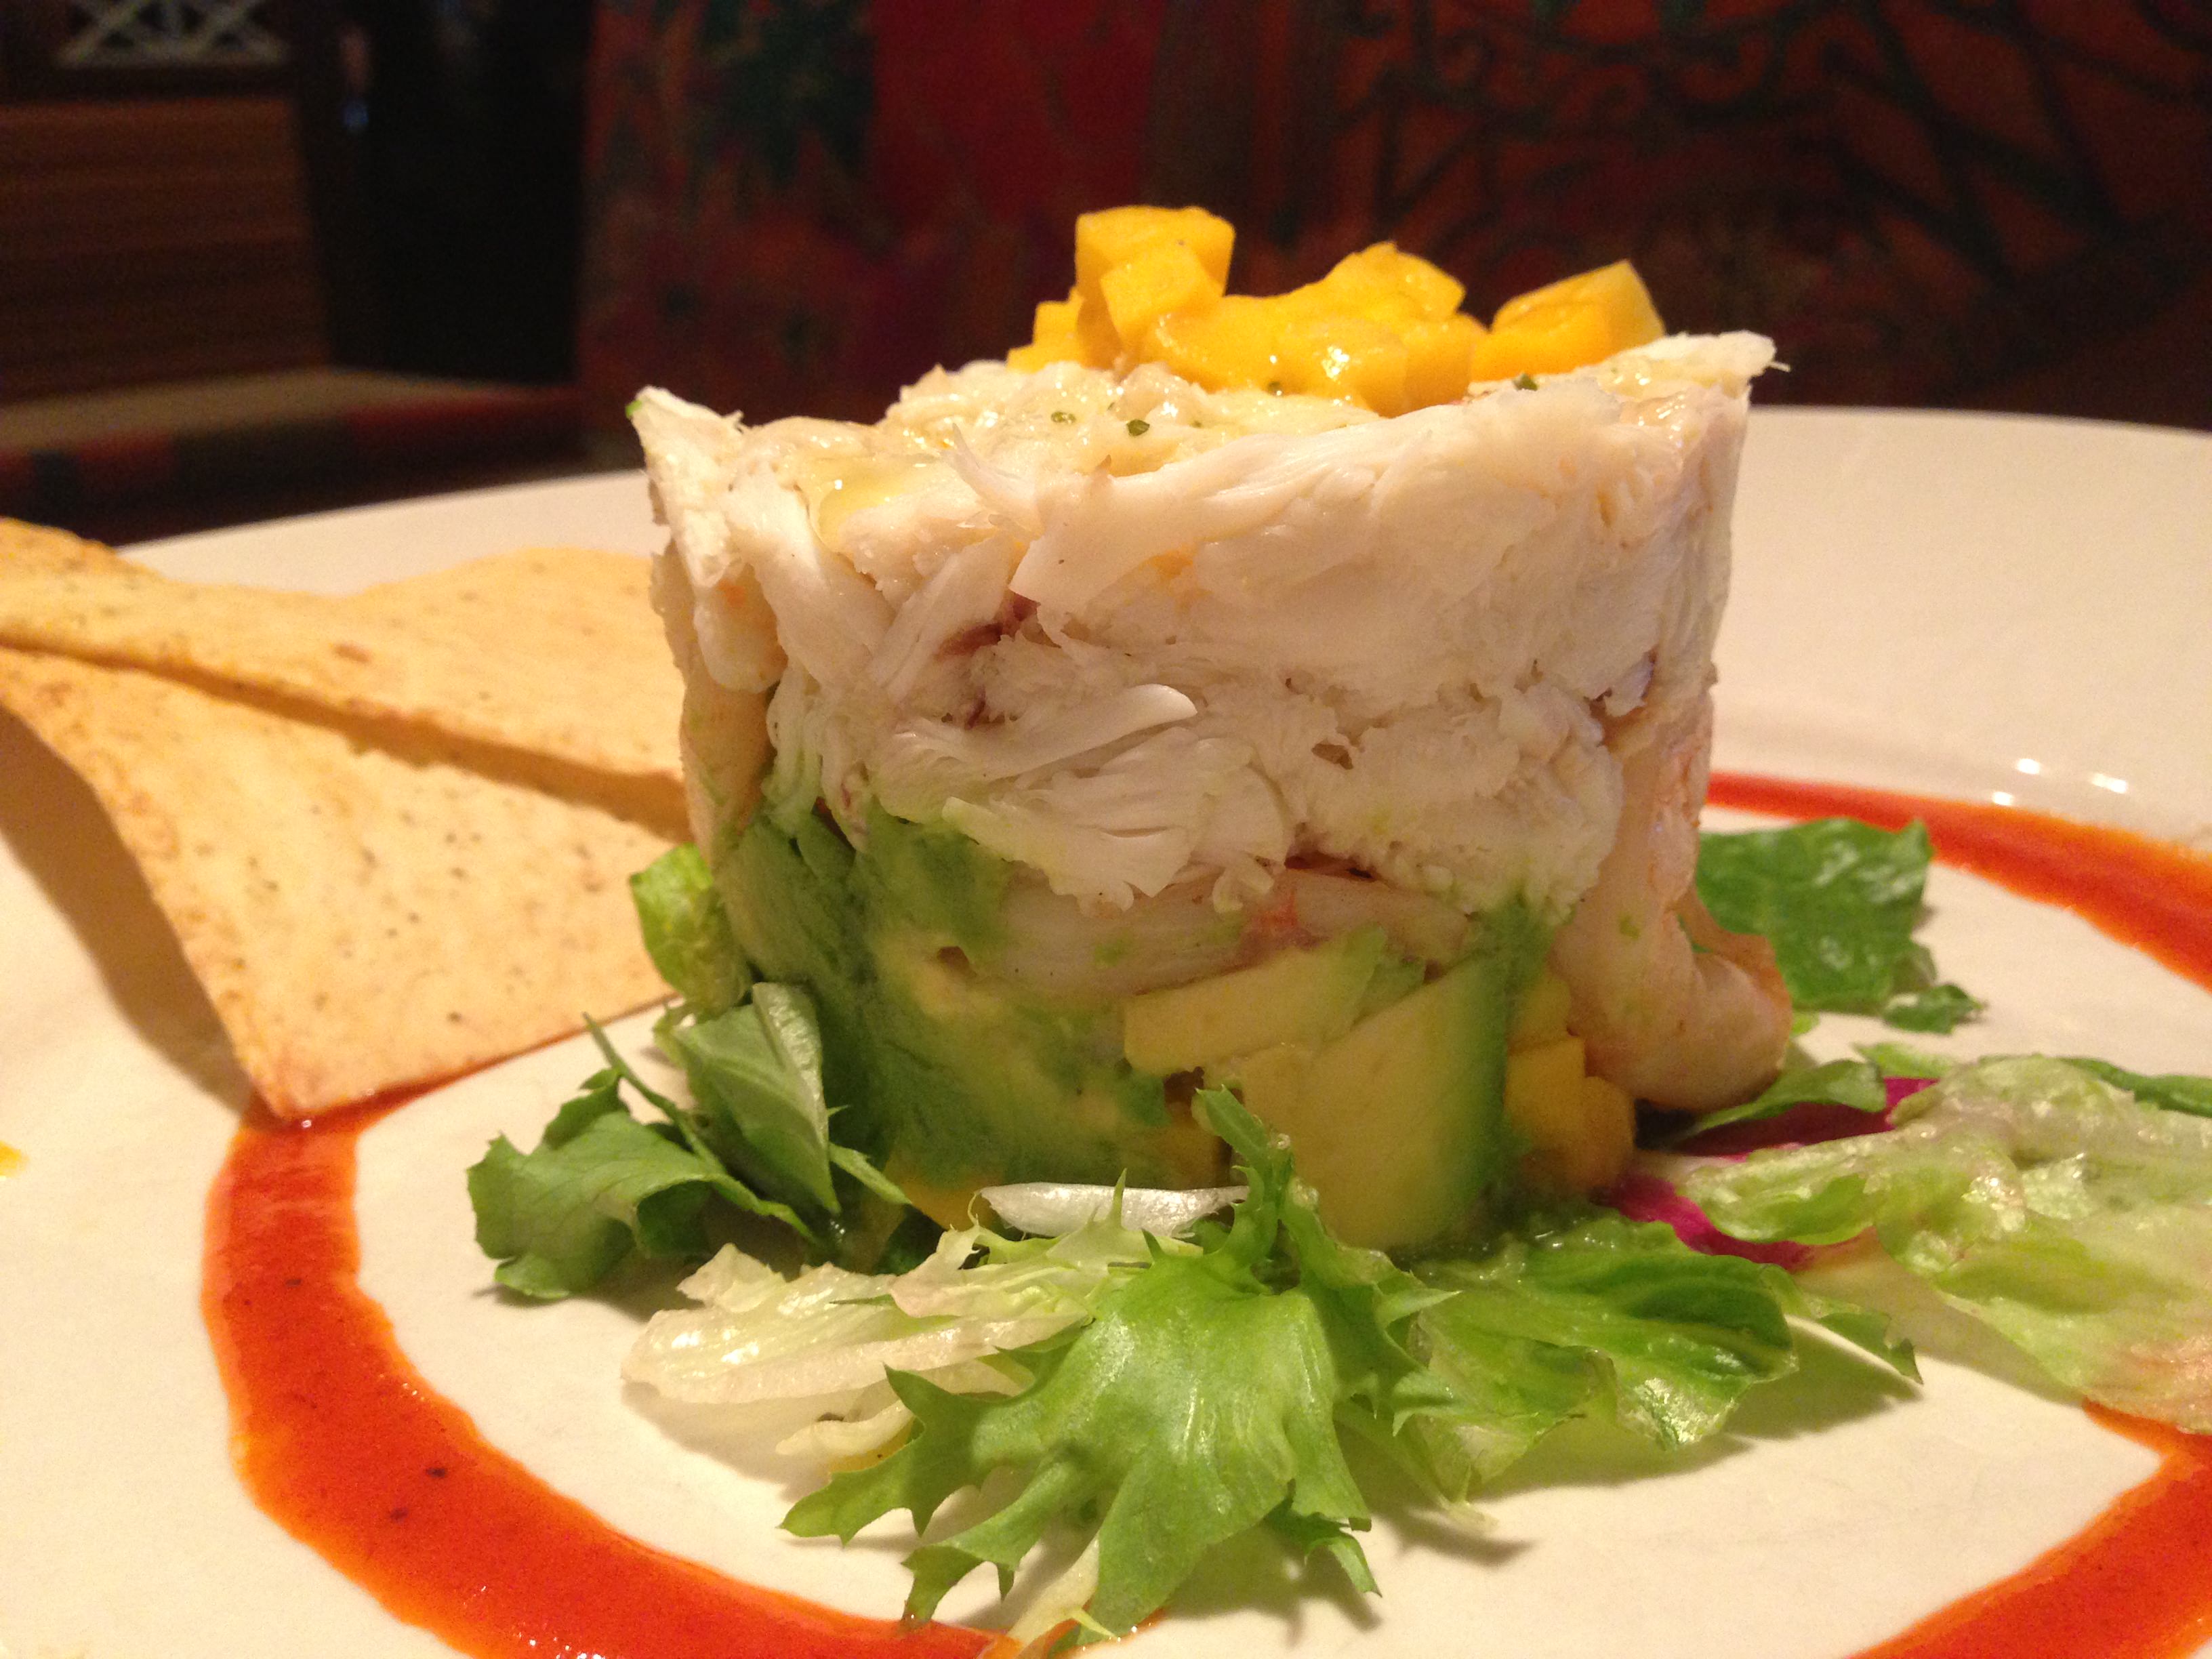 The Jumbo Lump Crab Stack from @bahamabreeze is a winner!